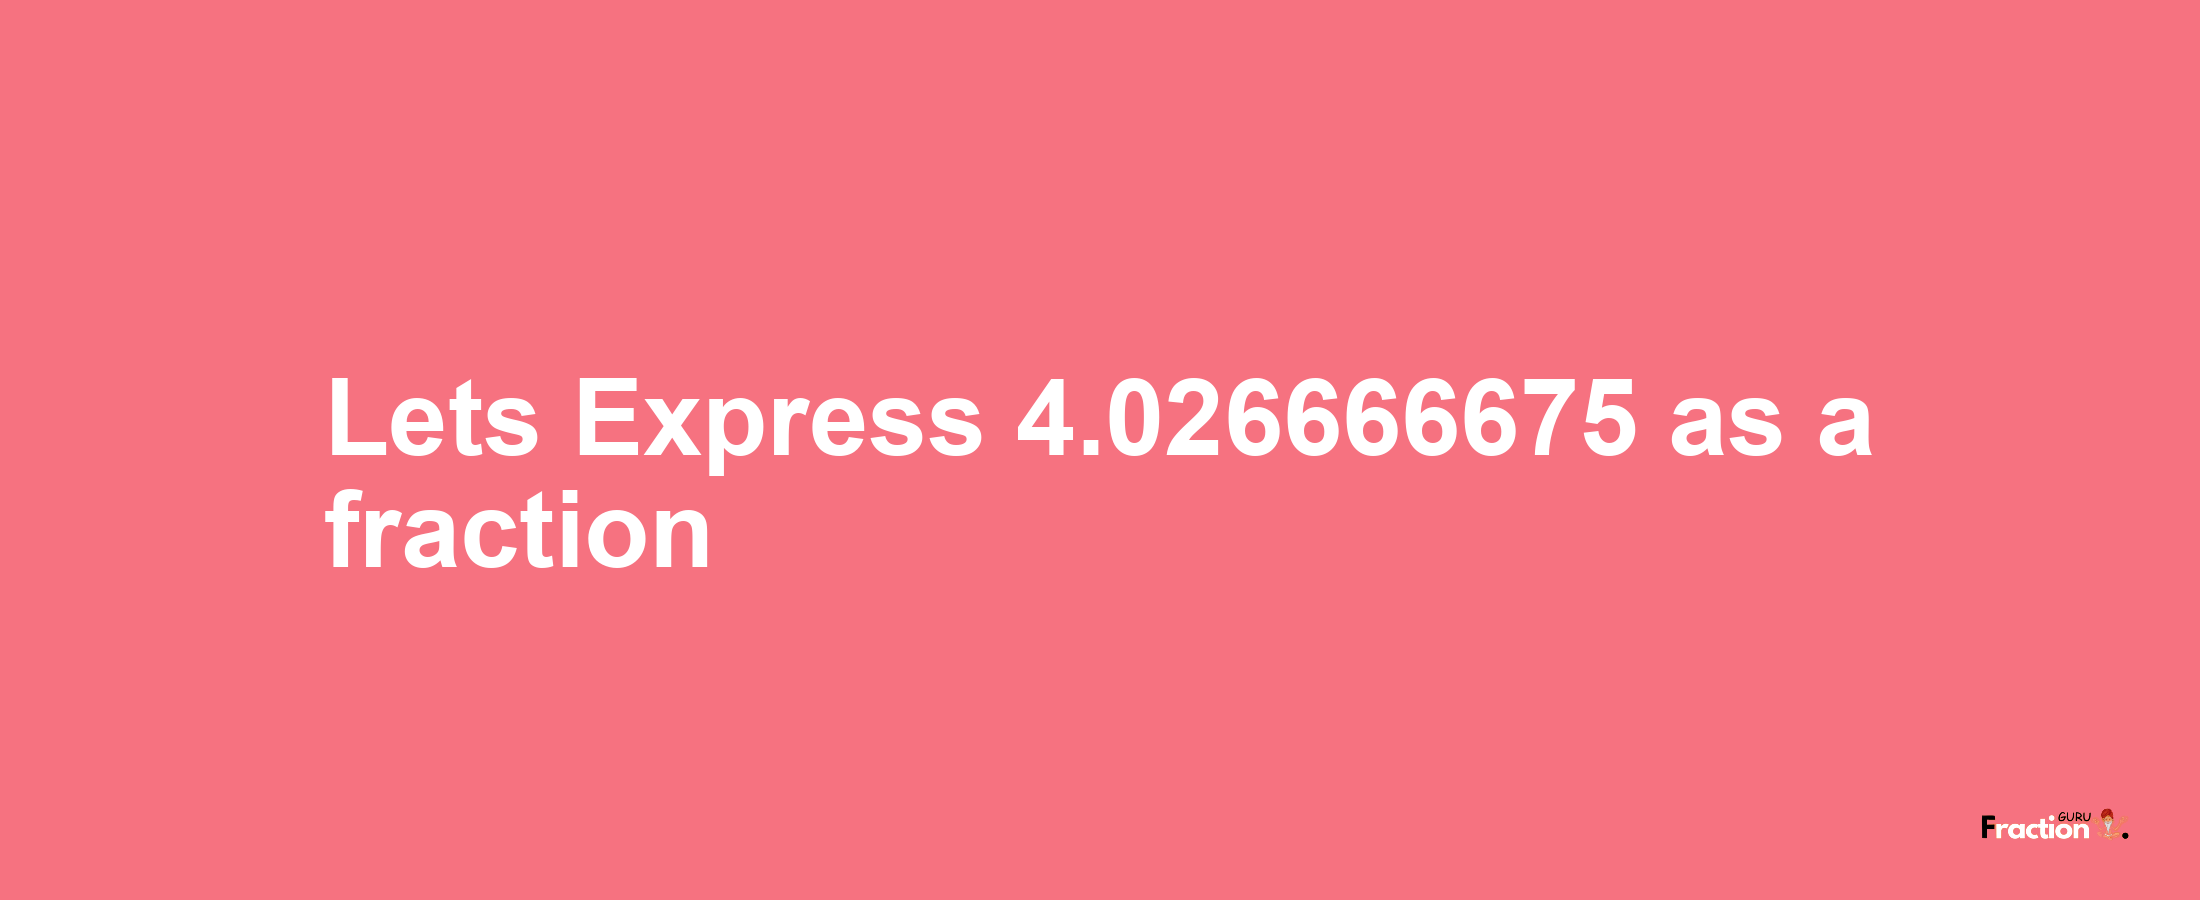 Lets Express 4.026666675 as afraction